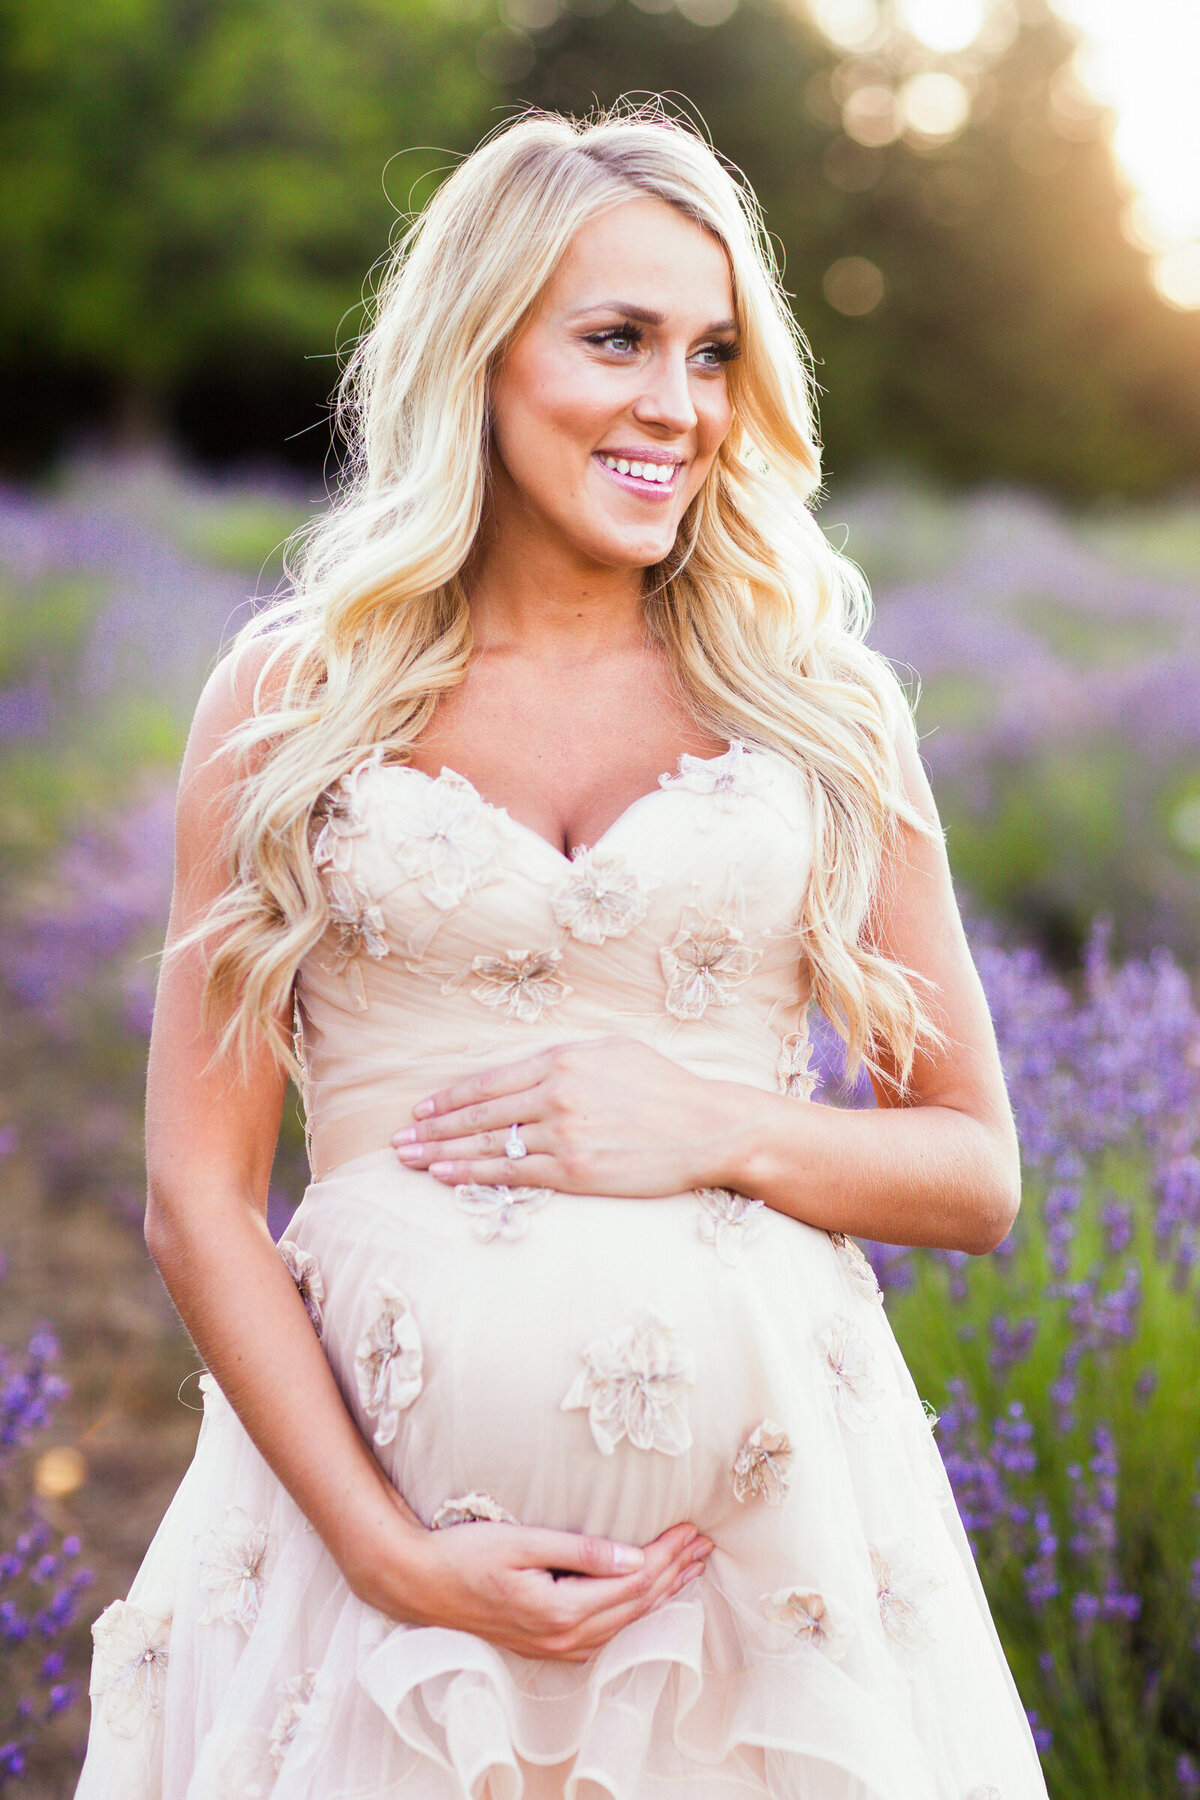 pregnant woman holding baby bump for maternity photography session in lavender field